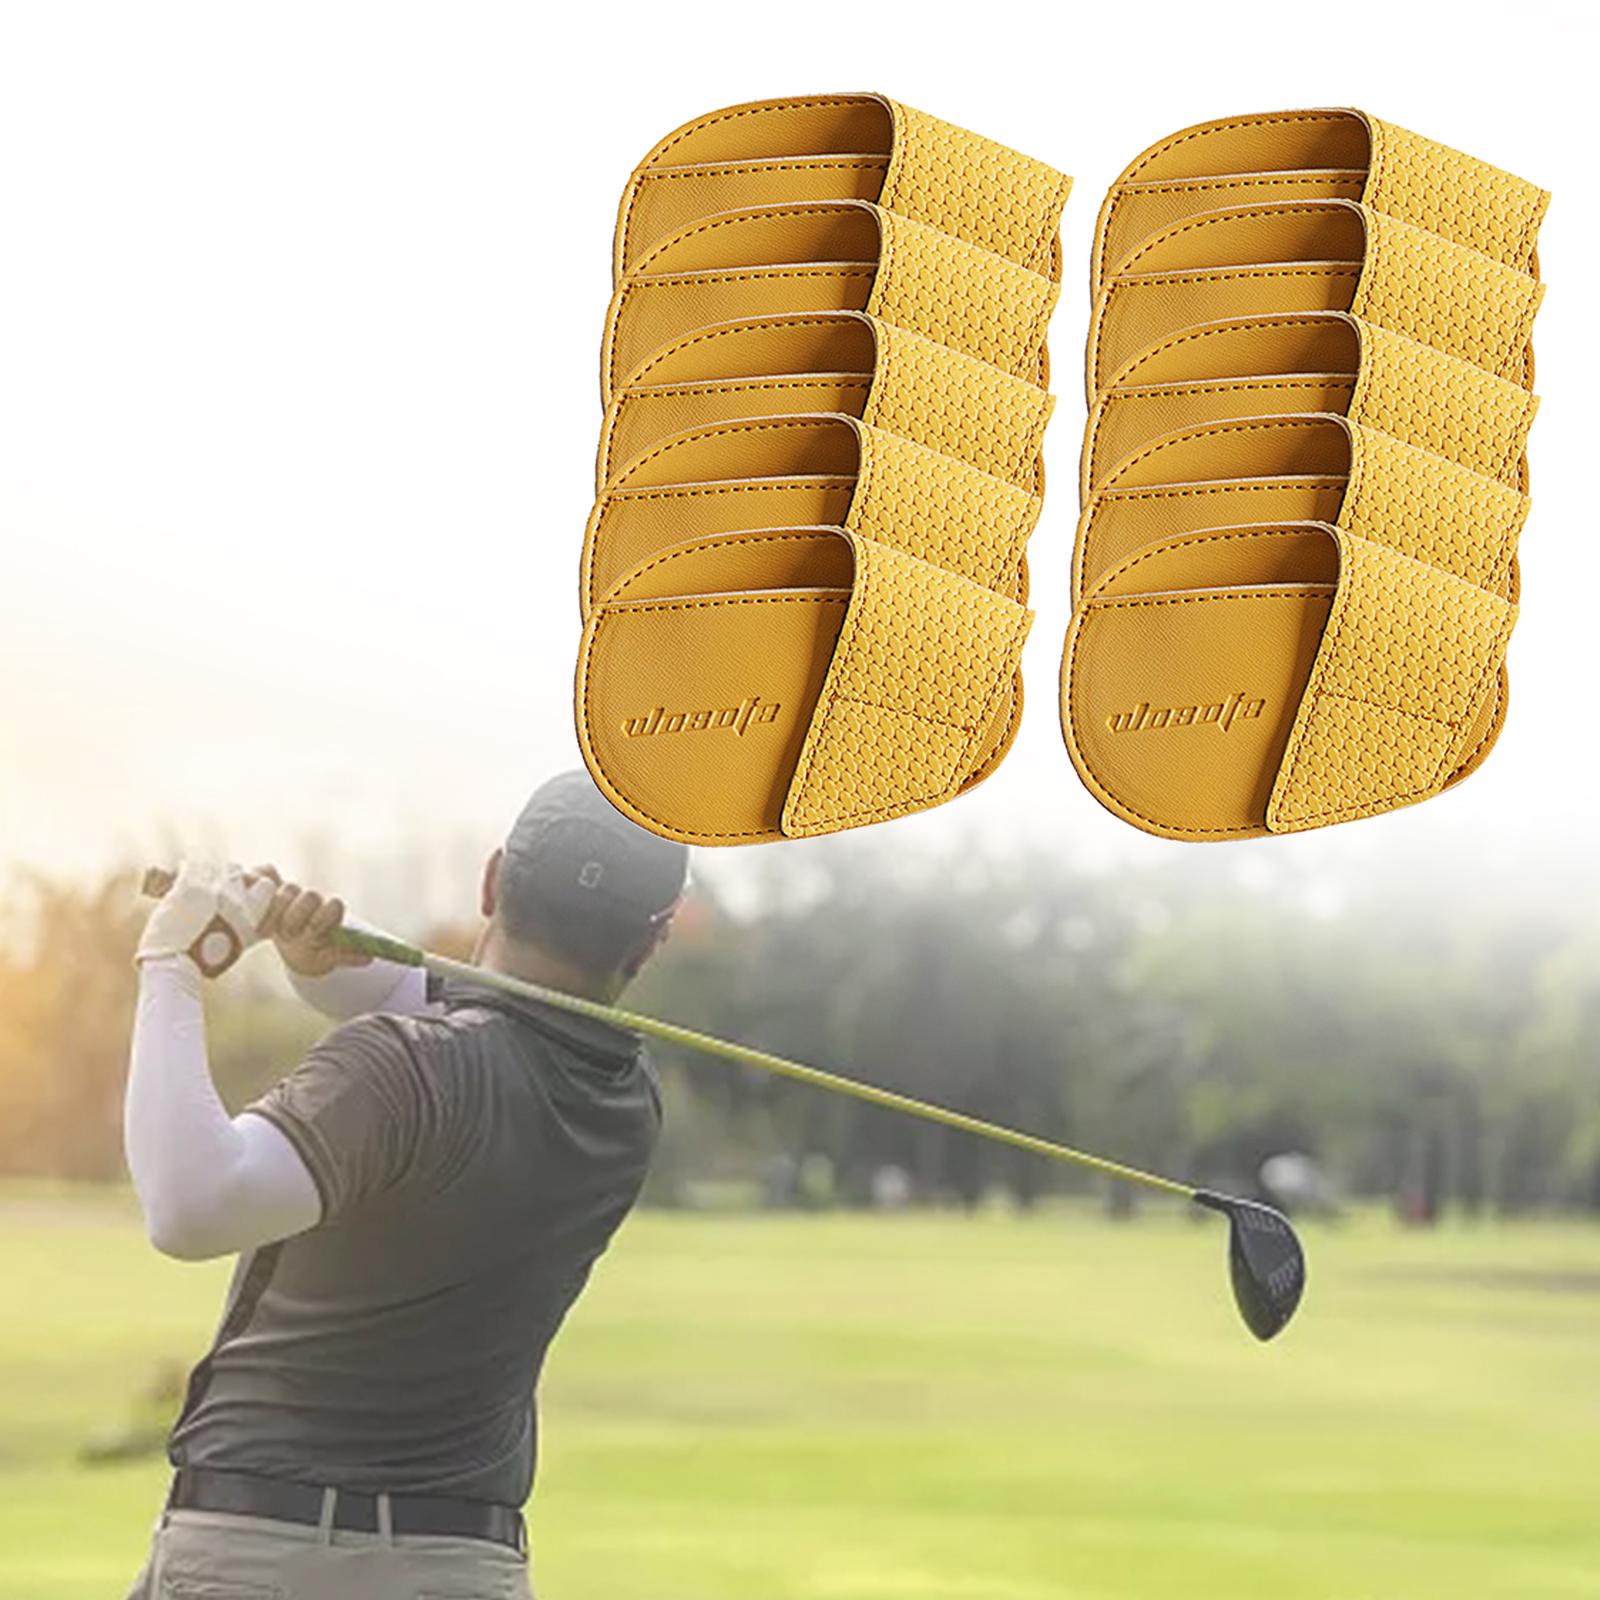 Golf Head Covers PU Portable Protector for Athlete Travel Golf Training Yellow Large